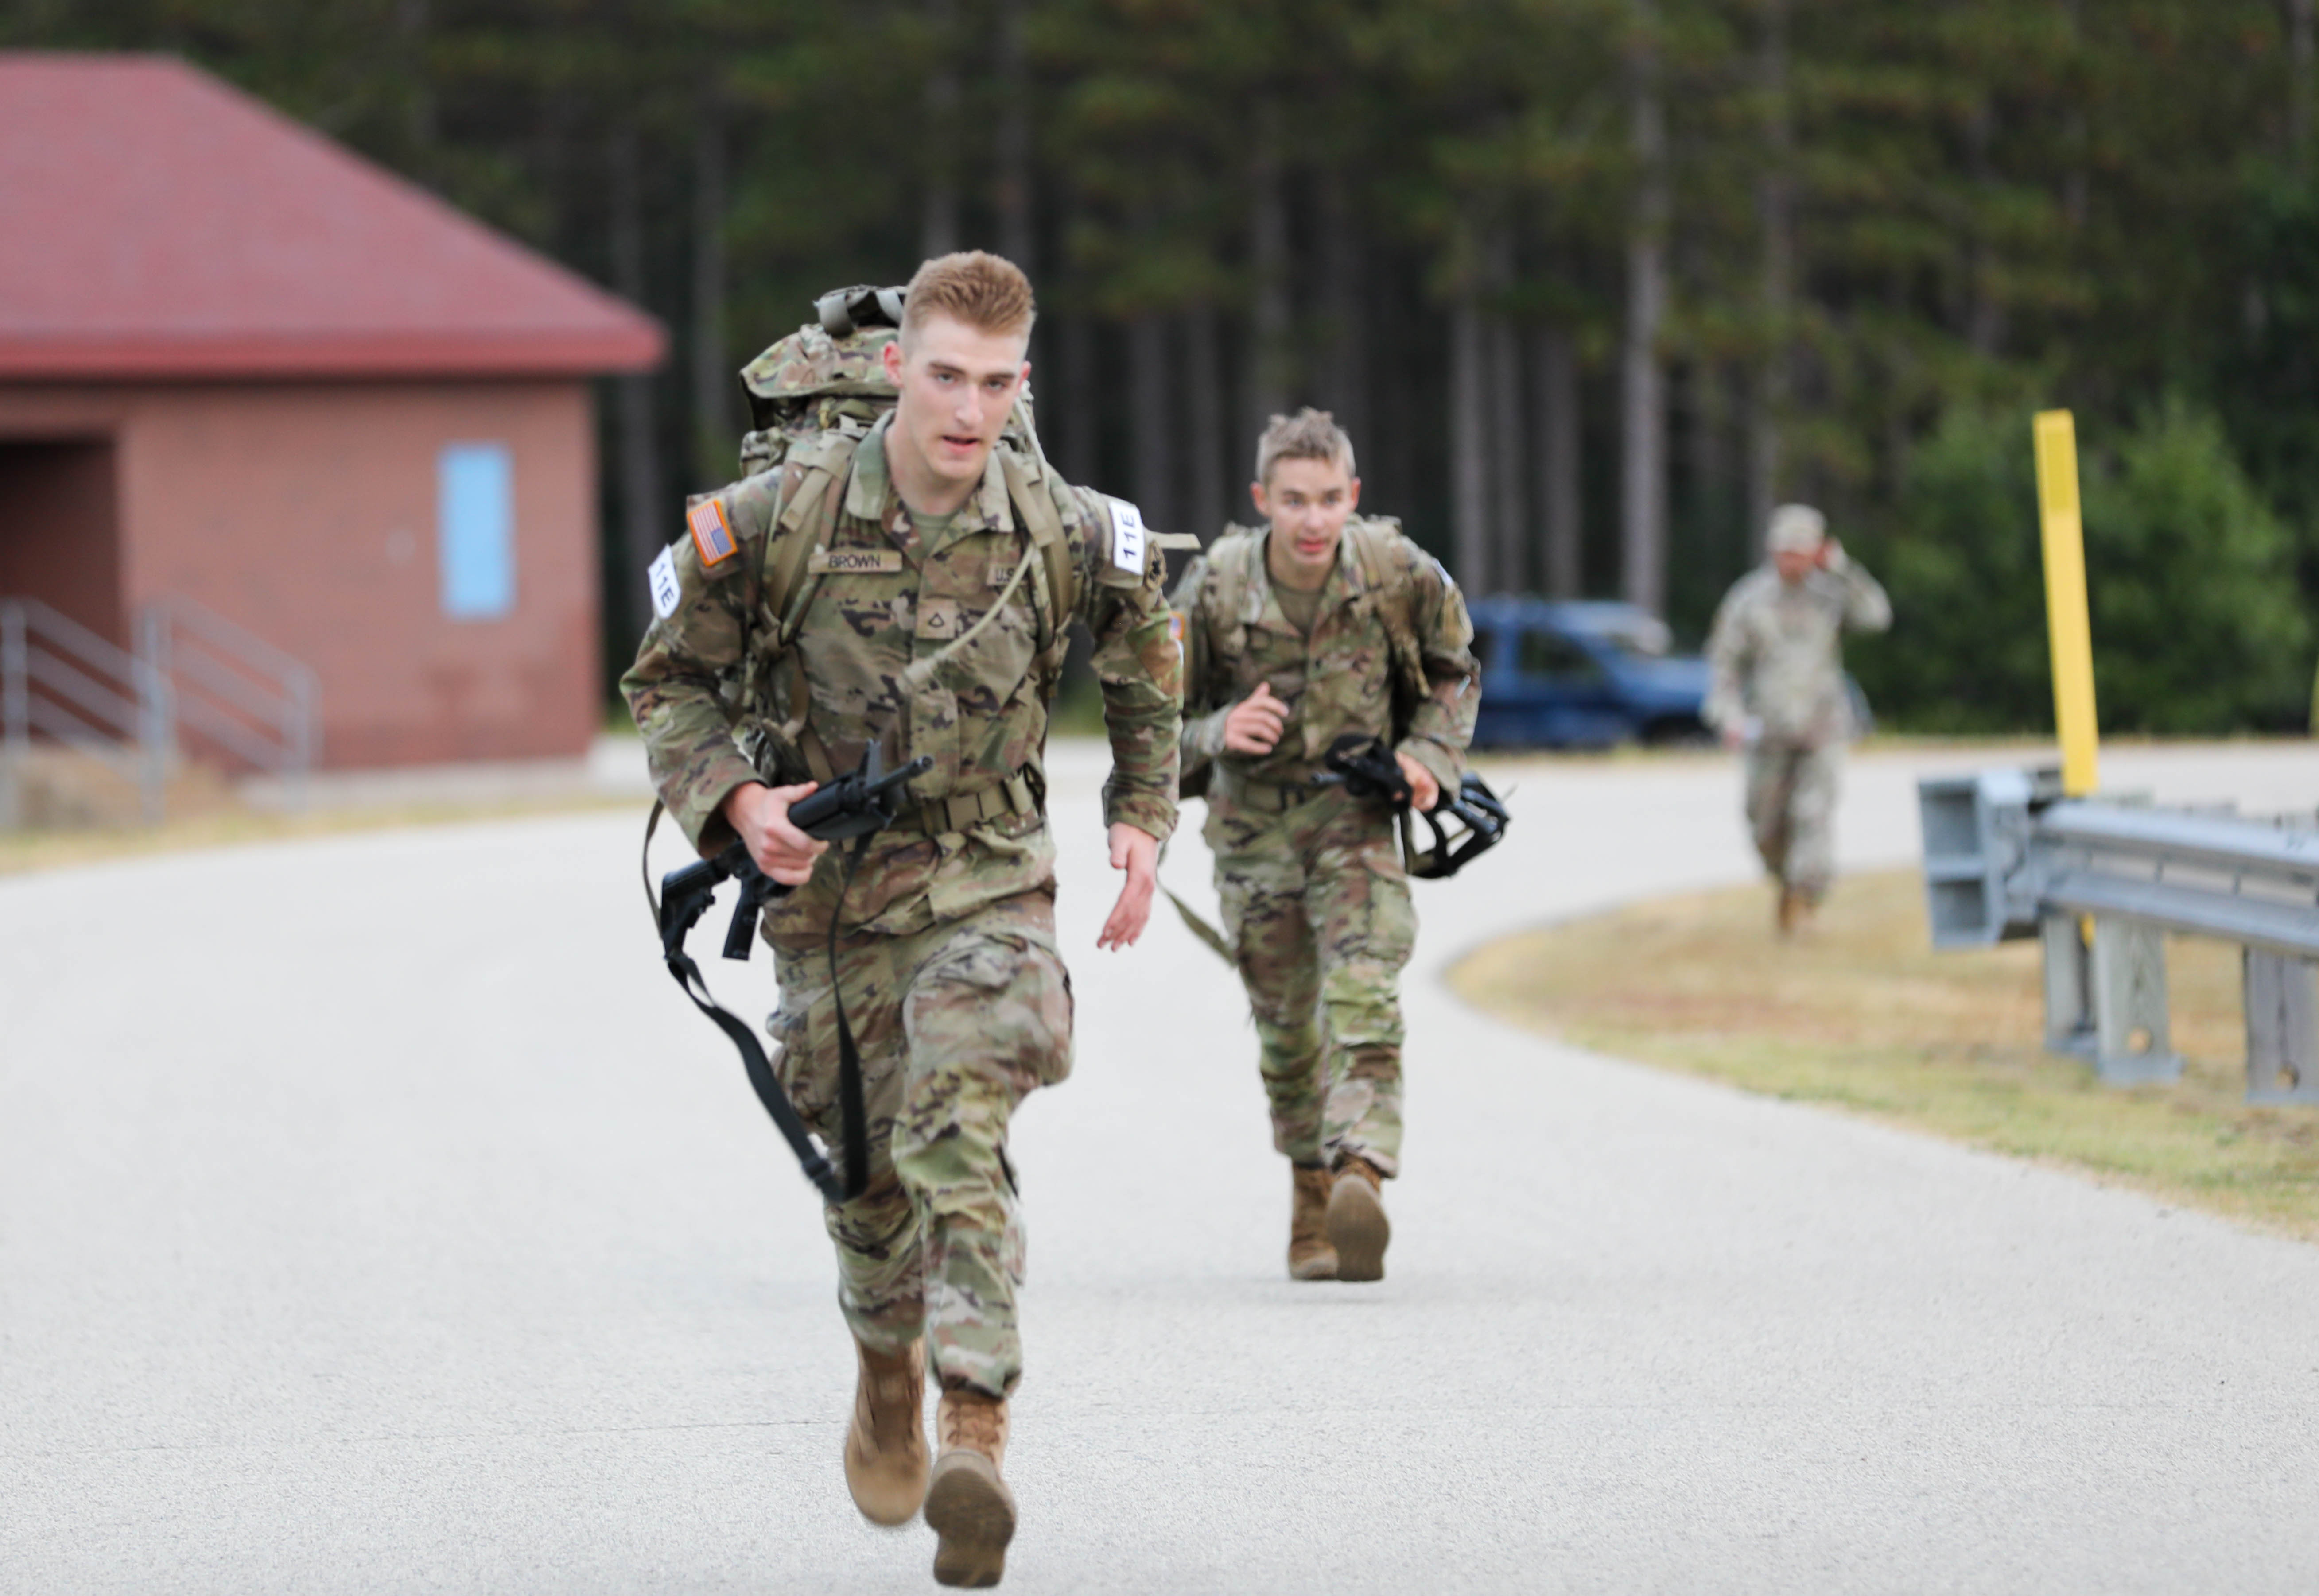 Spc. John Mundey (left), 2018 Army Reserve Soldier of the Year